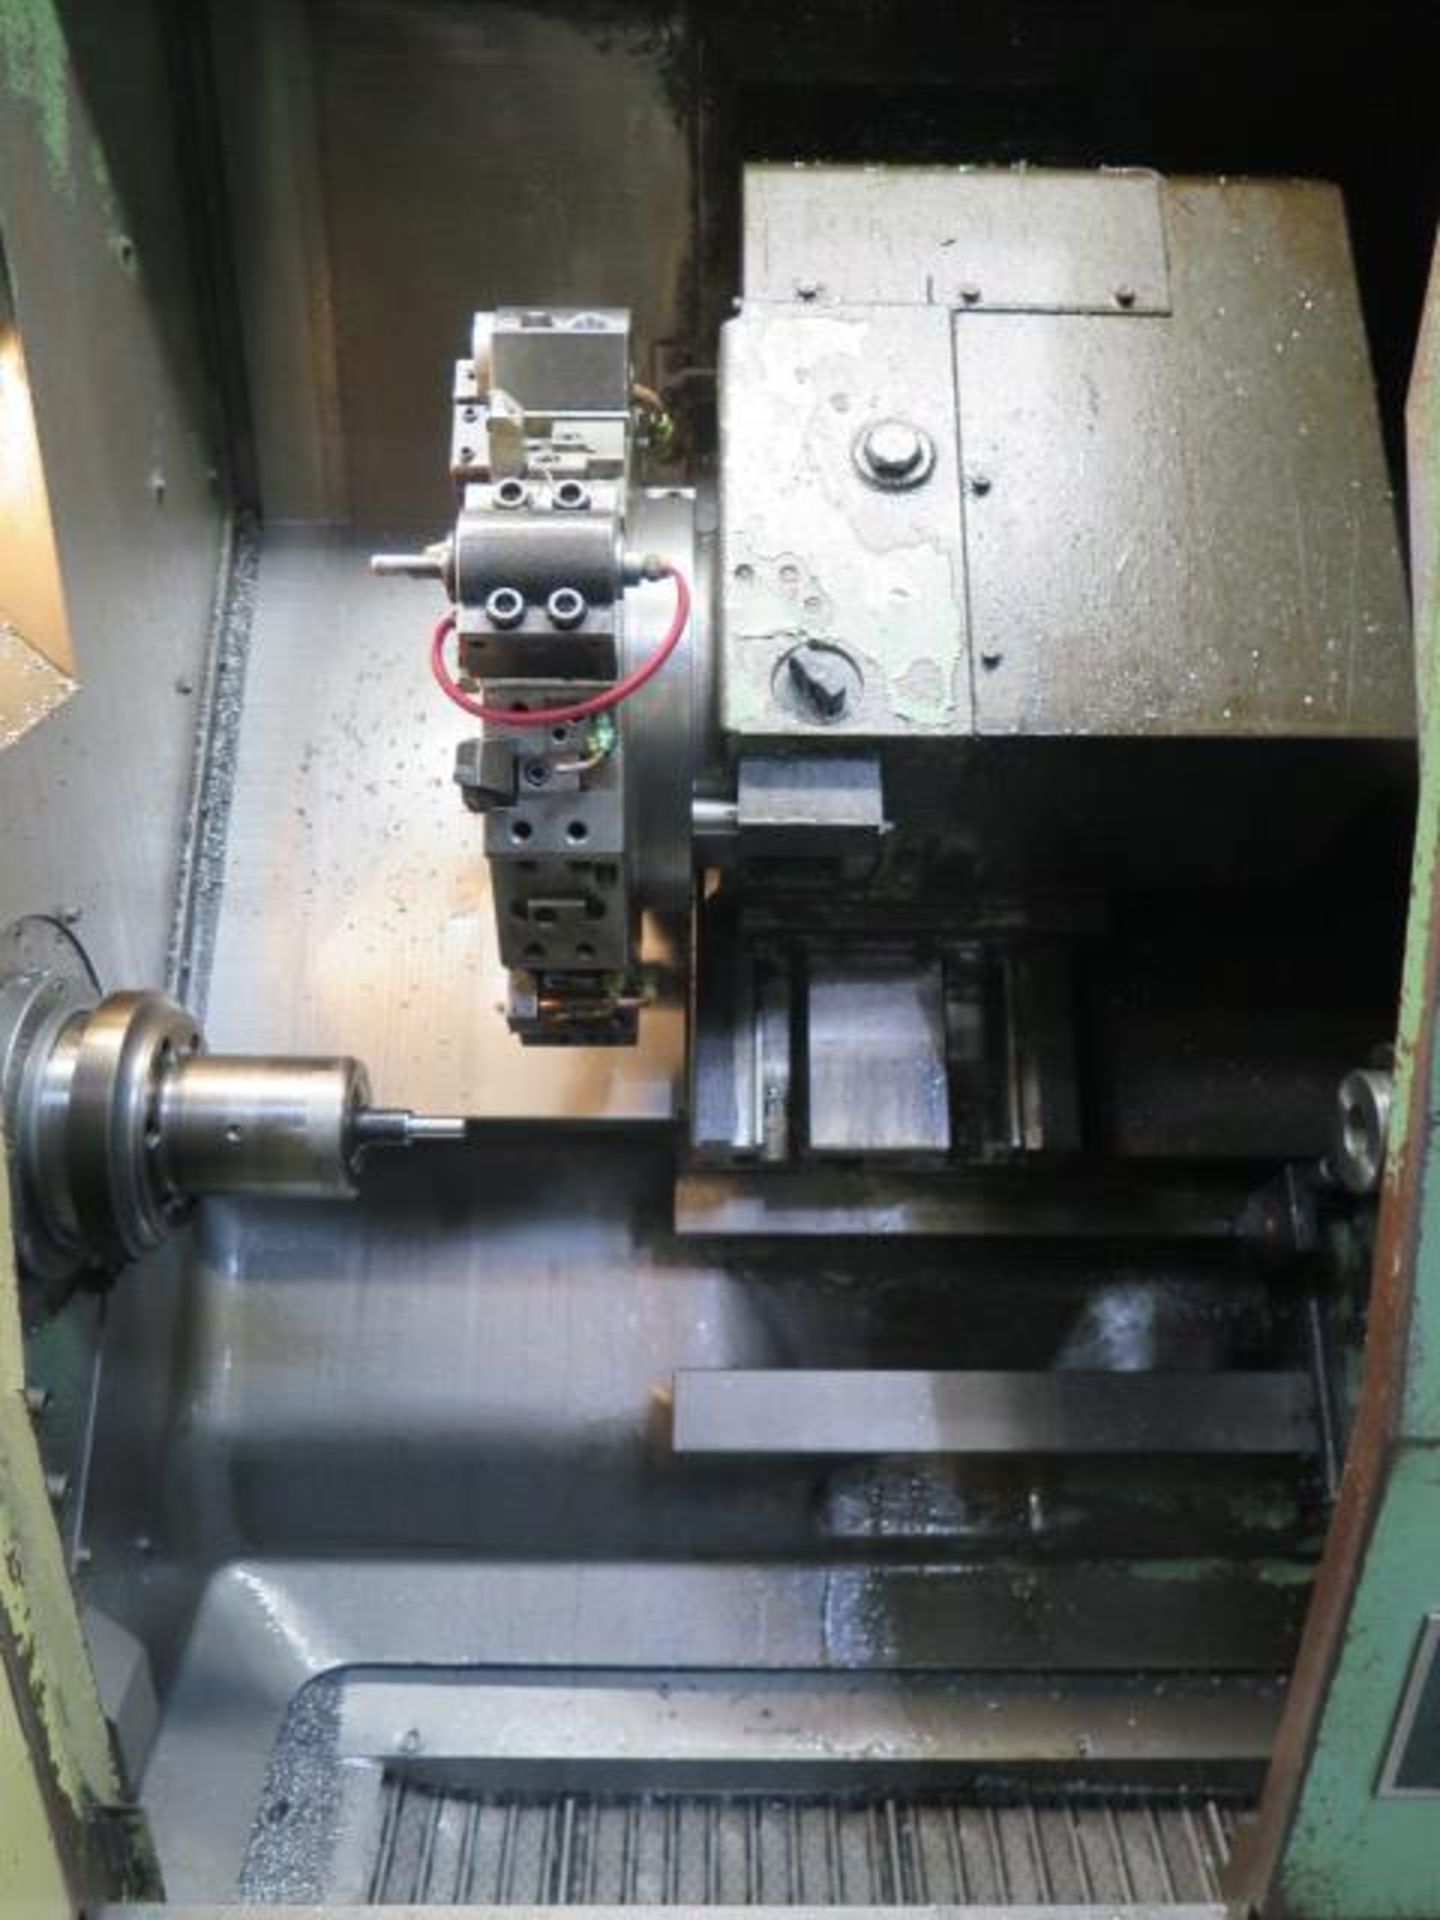 Mori Seiki SL-15 CNC Turning Center s/n 523 w/ Yasnac Controls, 12-Station Turret, SOLD AS IS - Image 4 of 13